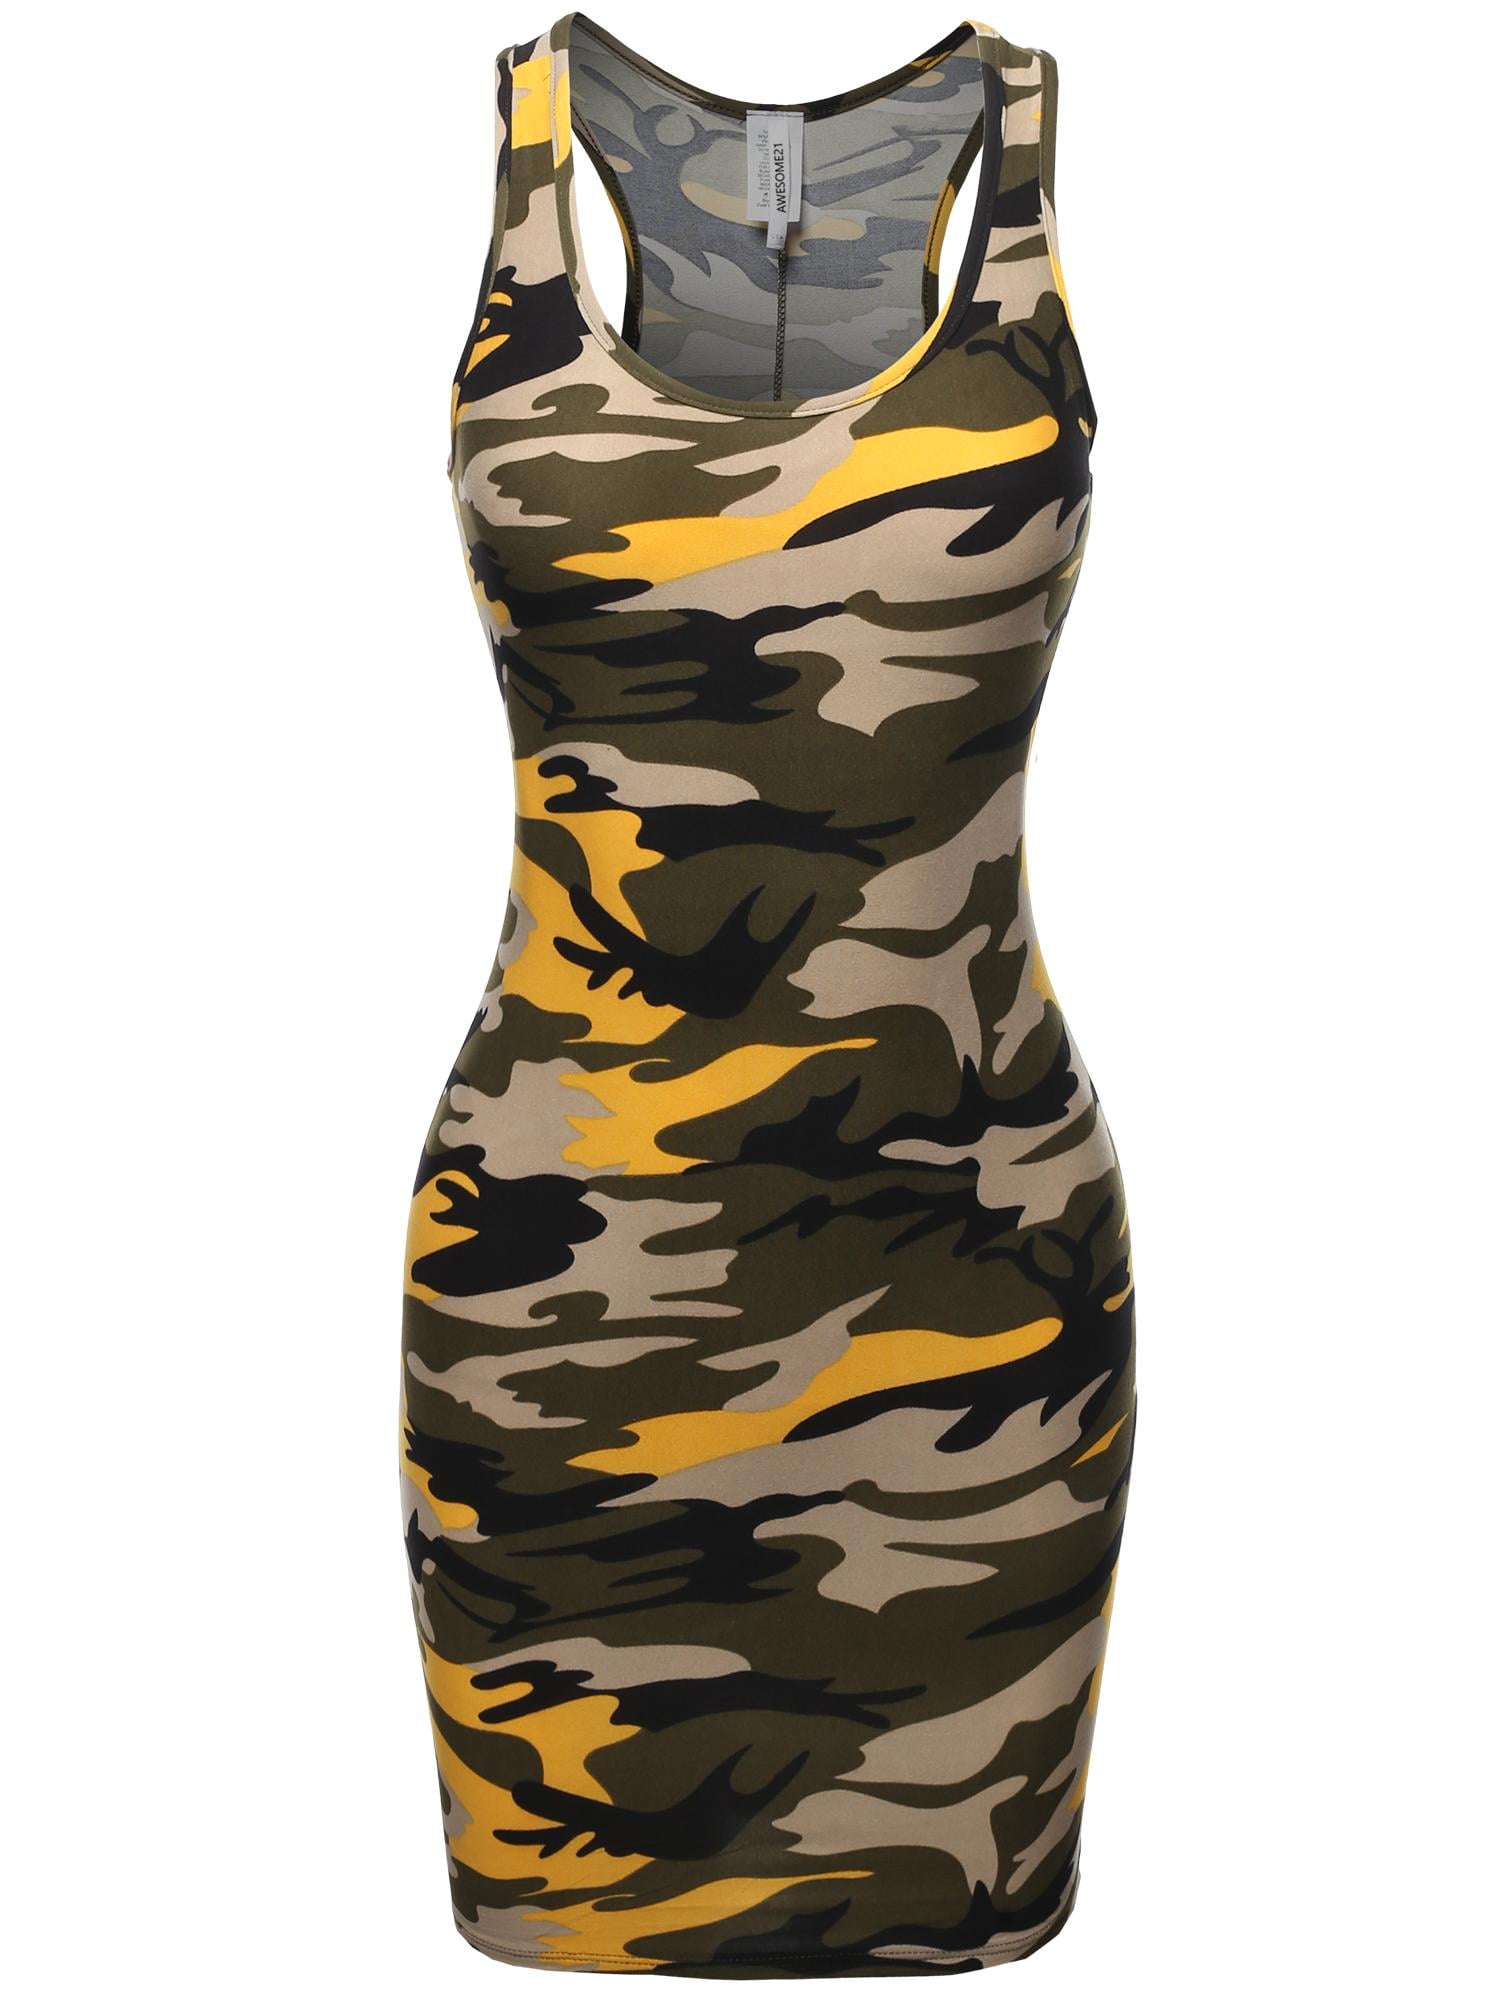 Fashionoutfit Women S Floral Or Camouflage Printed Sexy Body Con Racer Back Mini Dress